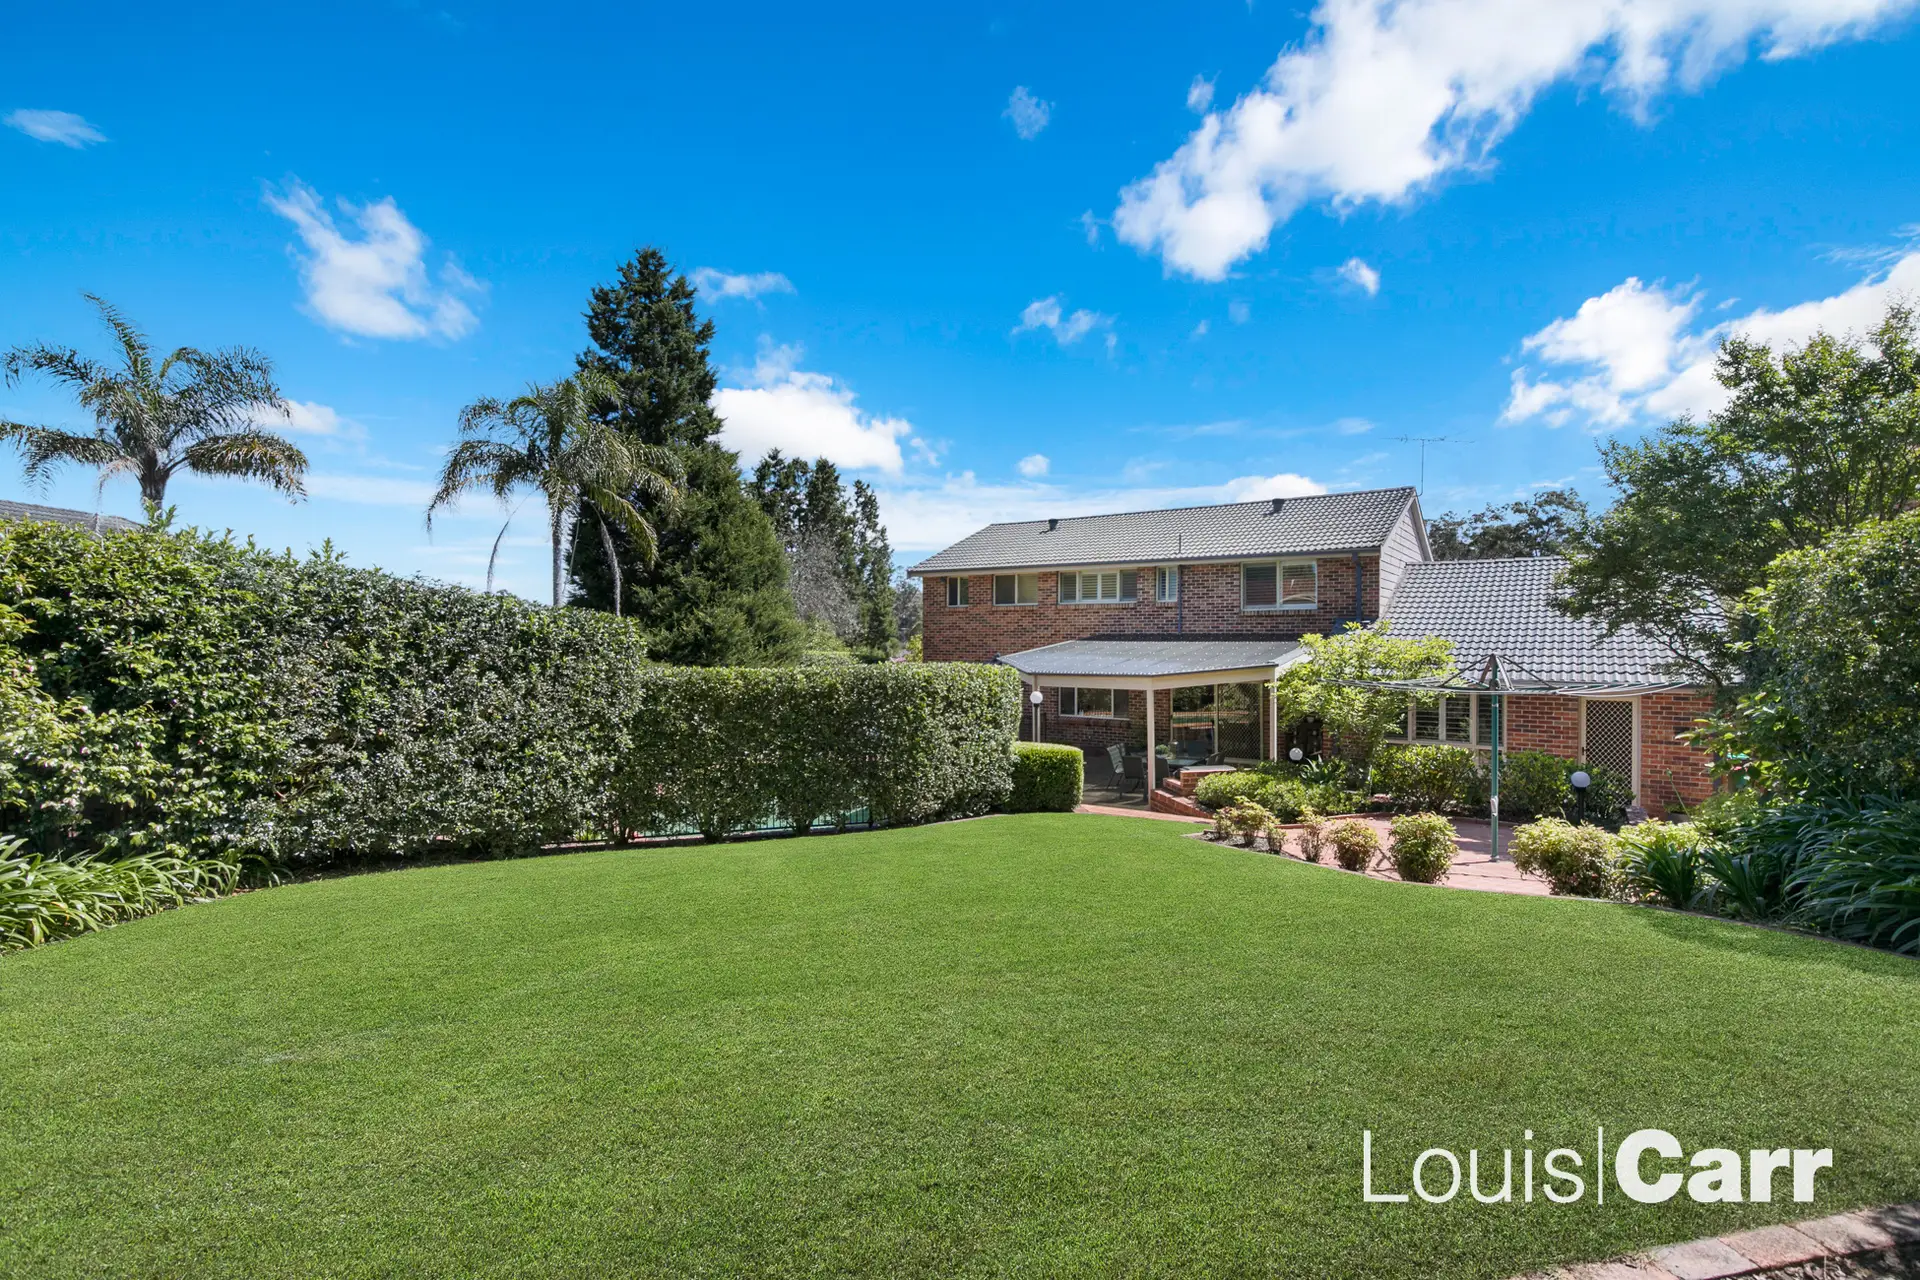 Photo #5: 12 Chiswick Place, Cherrybrook - Sold by Louis Carr Real Estate